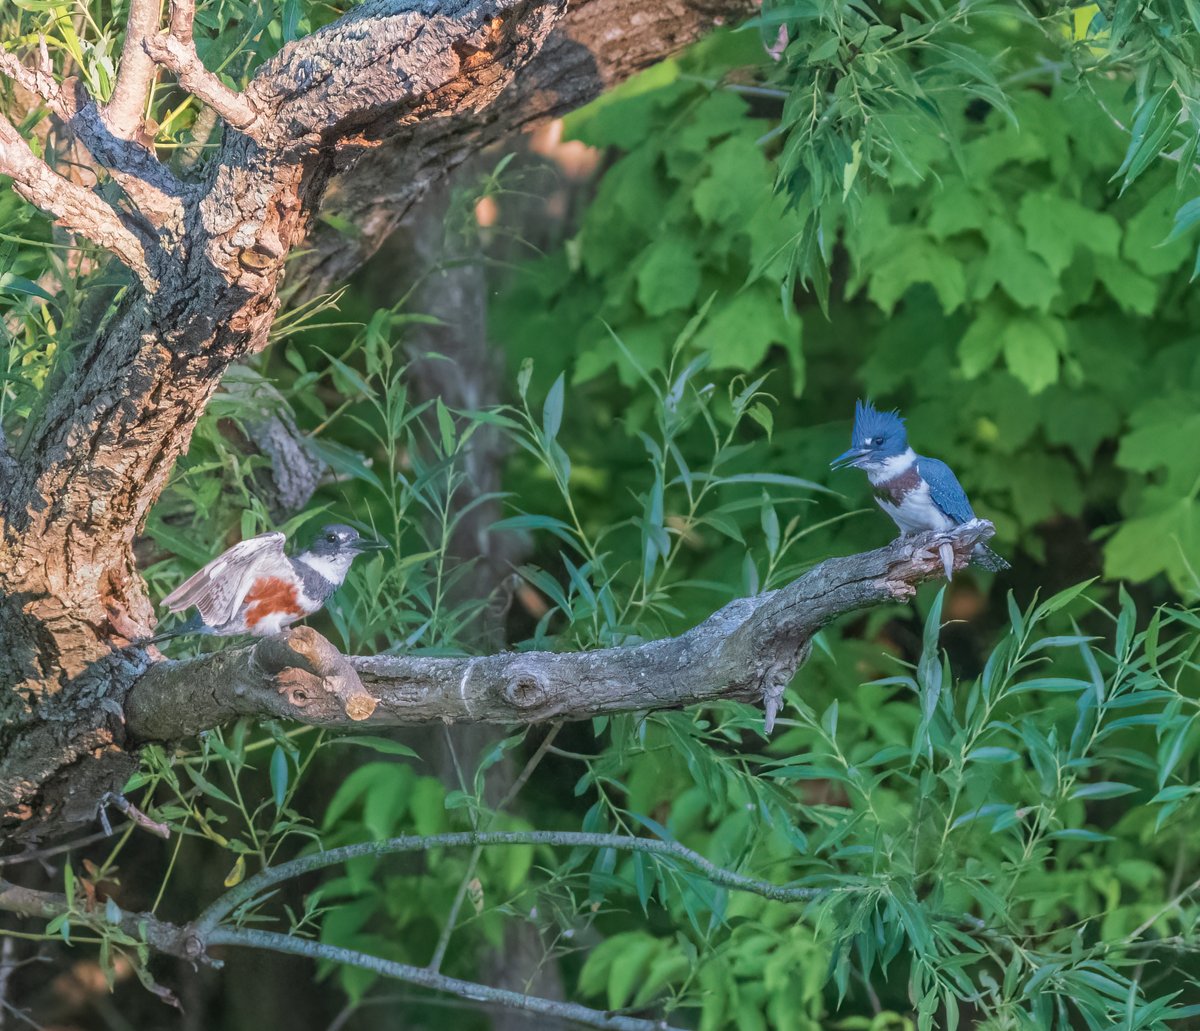 Belted kingfishers at the local pond. #ldnont